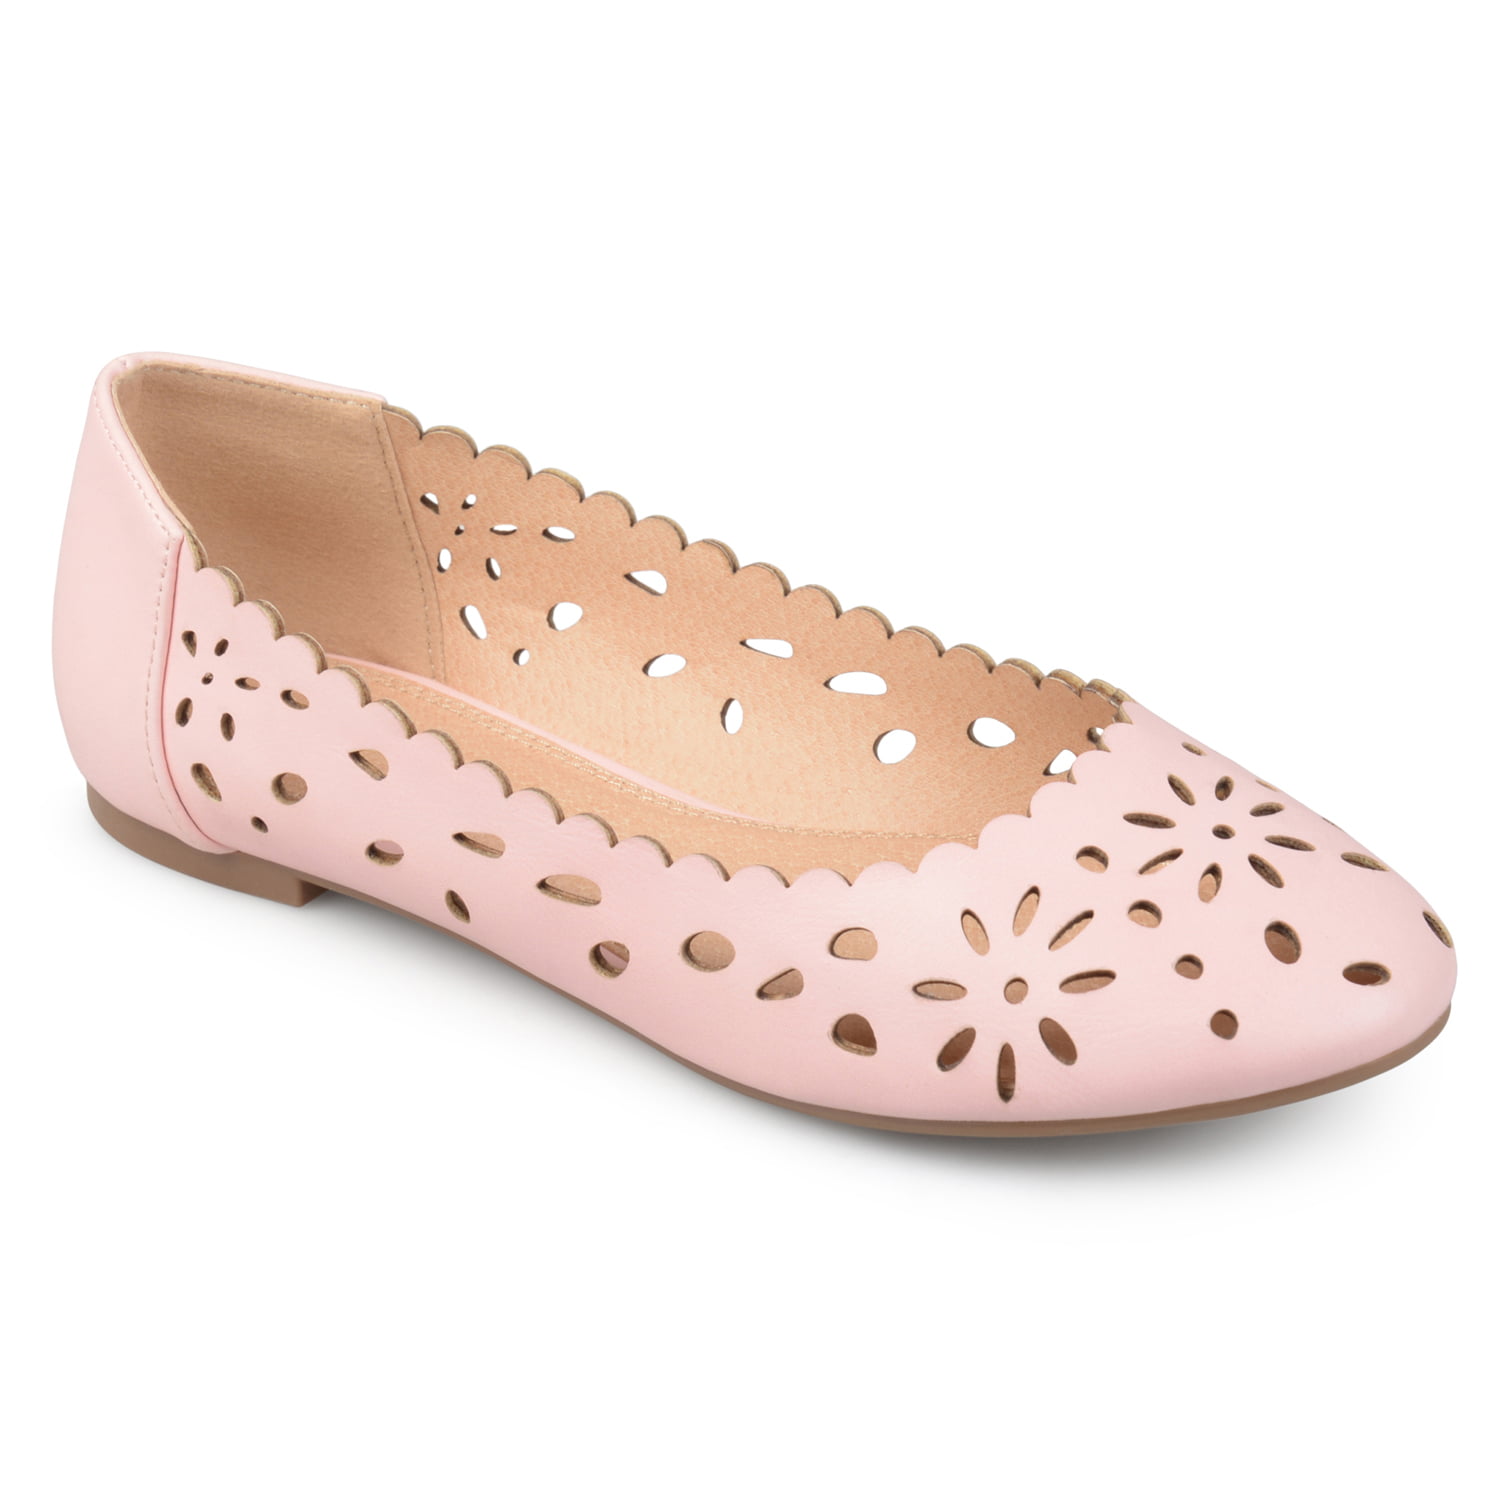 Brinley Co. Women's Faux Leather Wide Width Scalloped Laser-cut Round ...